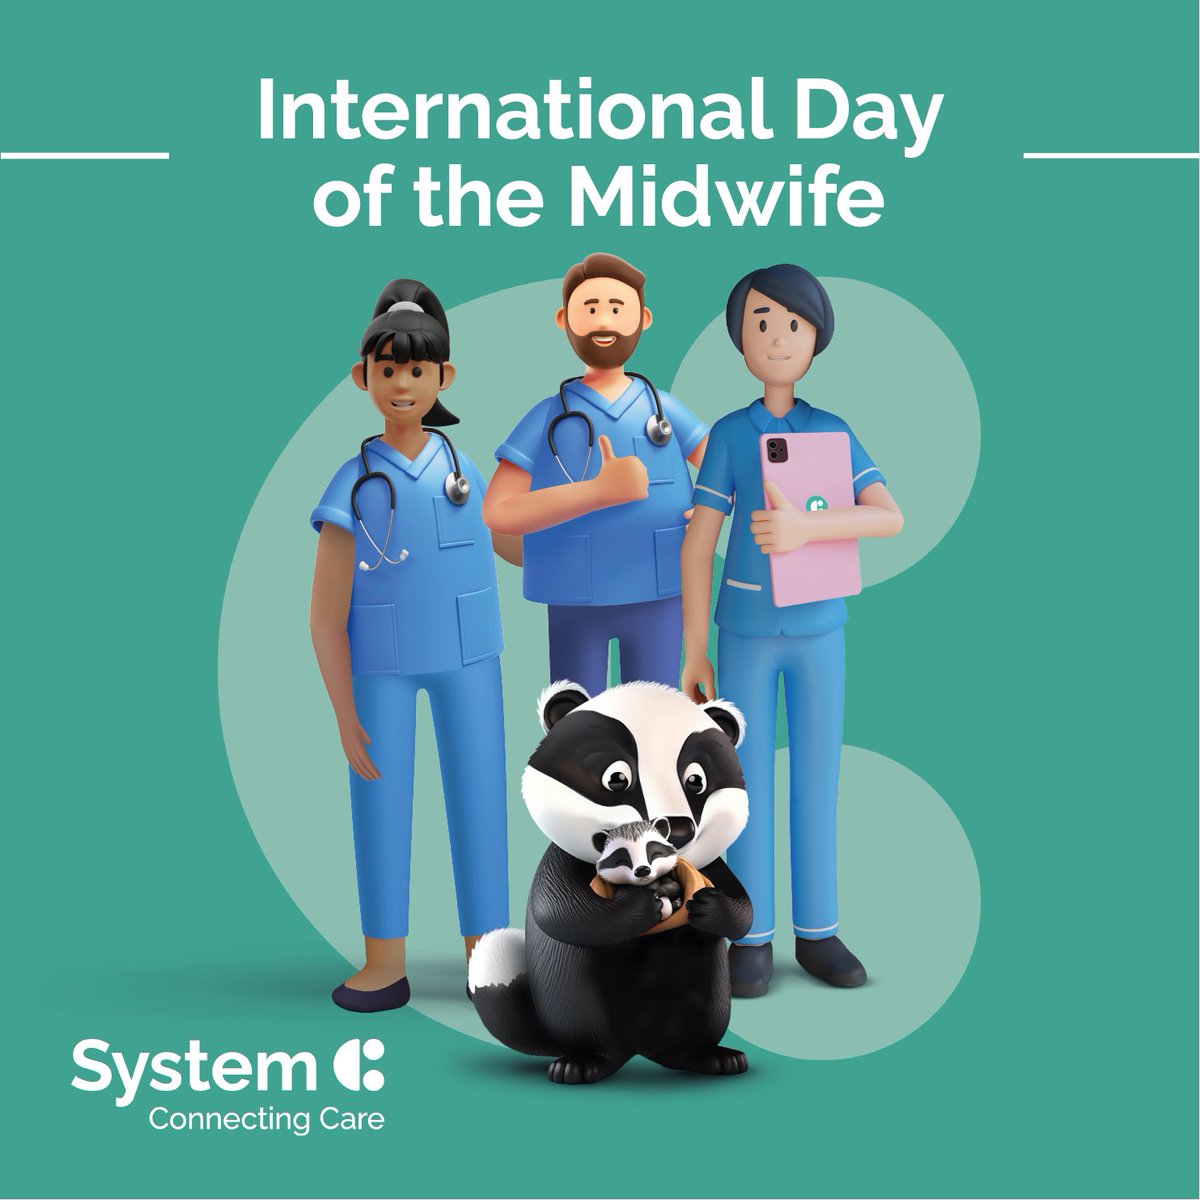 Today is an incredibly special day that is set aside to celebrate and embrace all the midwives around the globe 🌐👩🏼‍⚕️👨🏾‍⚕️ Here at System C, we are surrounded by a beloved community of midwives. Every single midwife performs a truly vital role in providing care and support 🤱